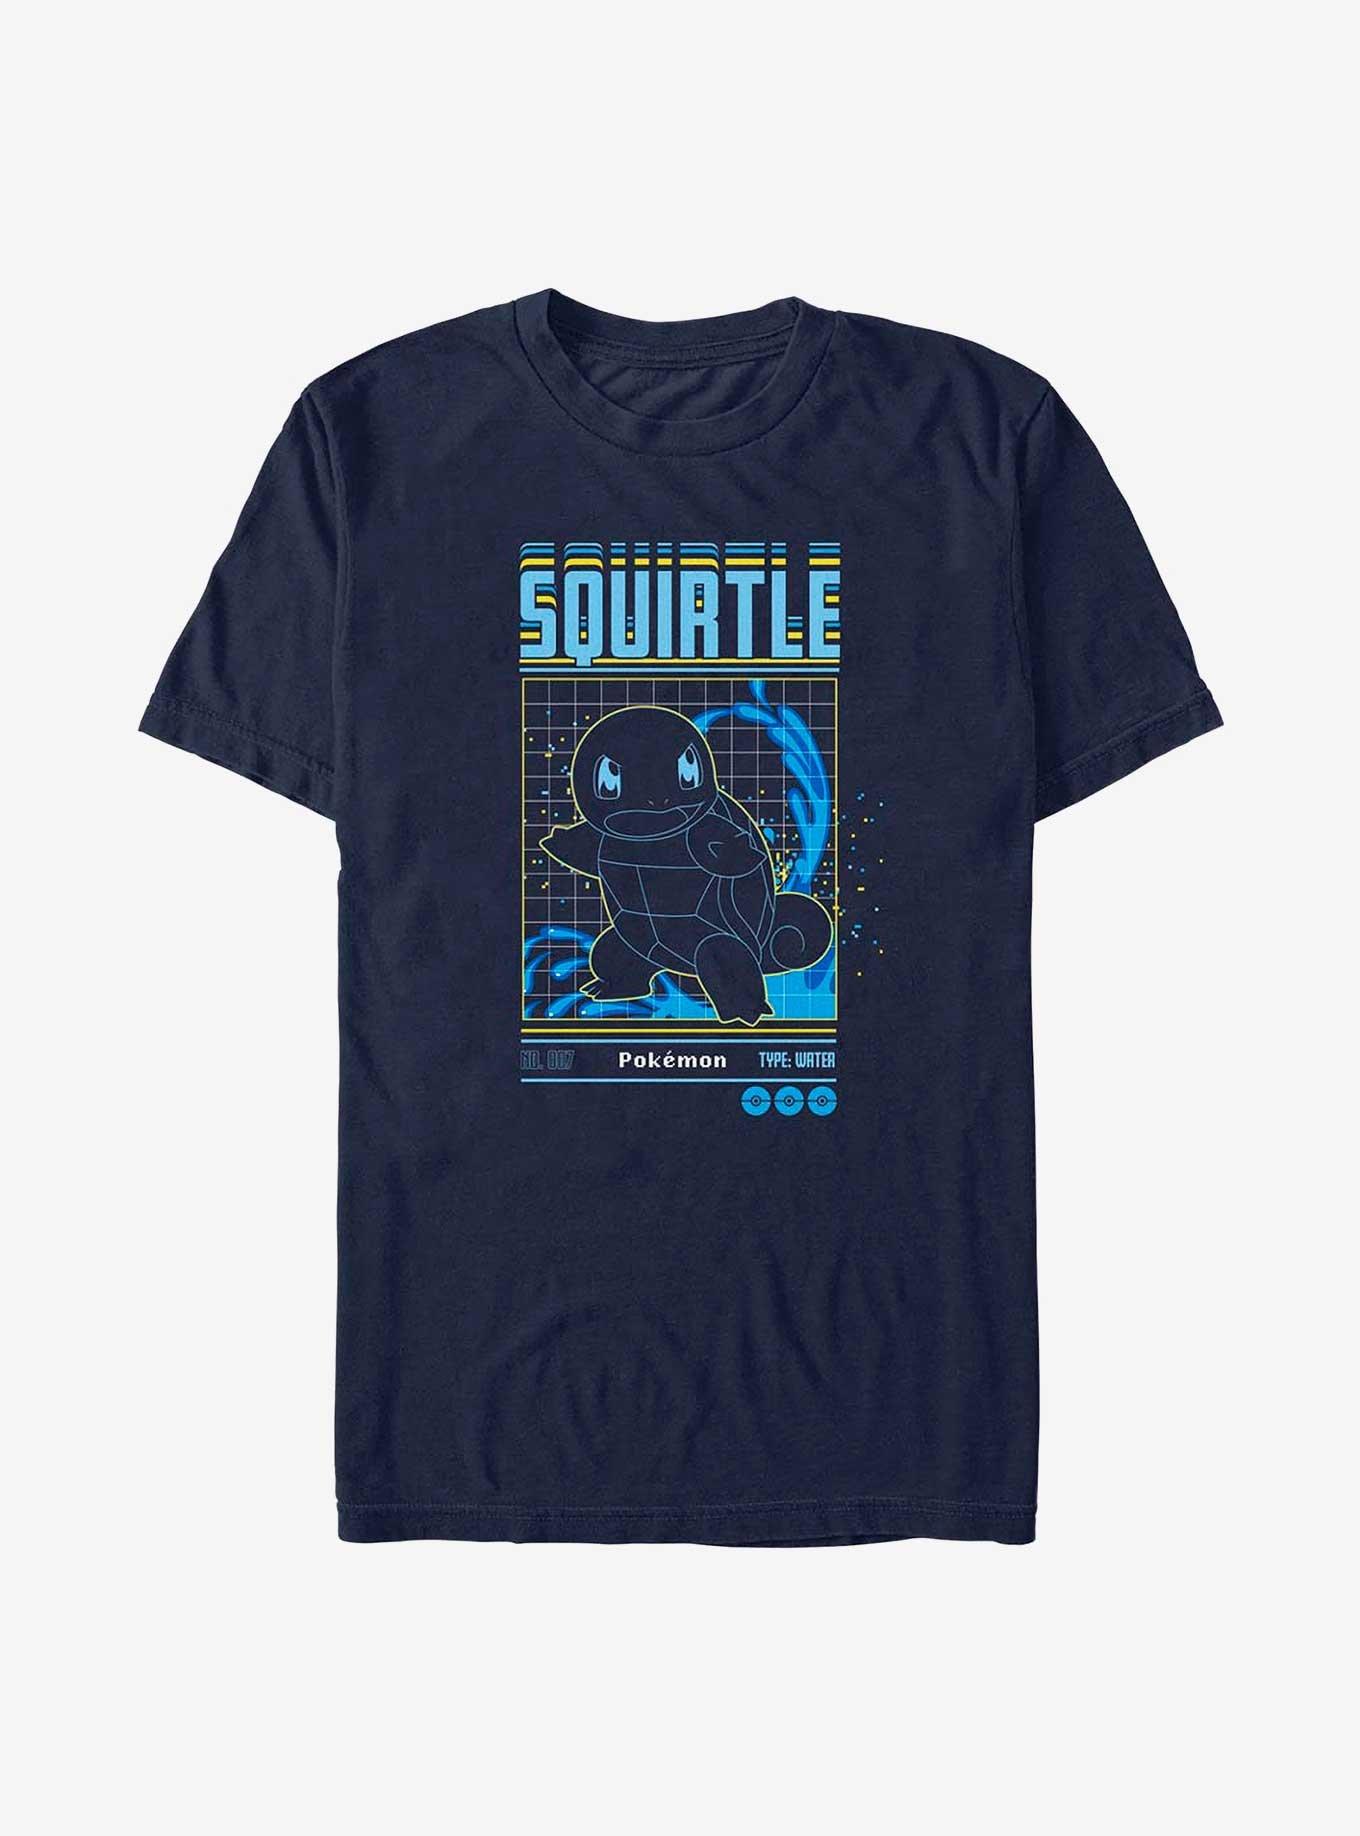 Pokemon Squirtle Water Type T-Shirt